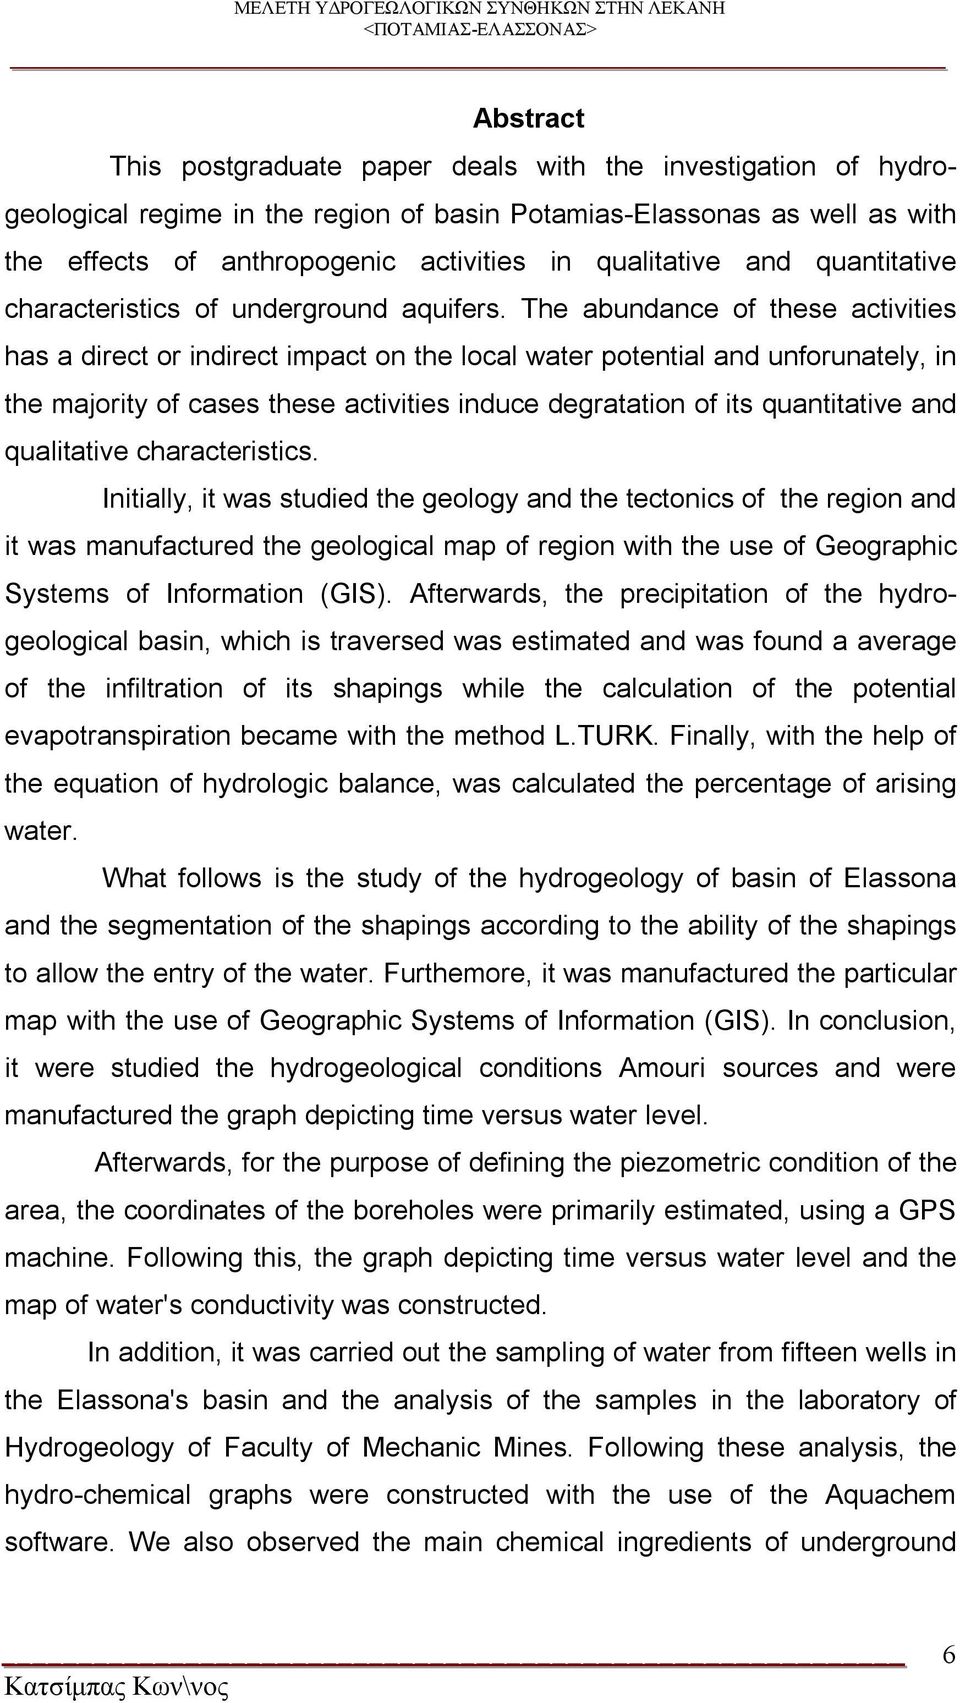 The abundance of these activities has a direct or indirect impact on the local water potential and unforunately, in the majority of cases these activities induce degratation of its quantitative and